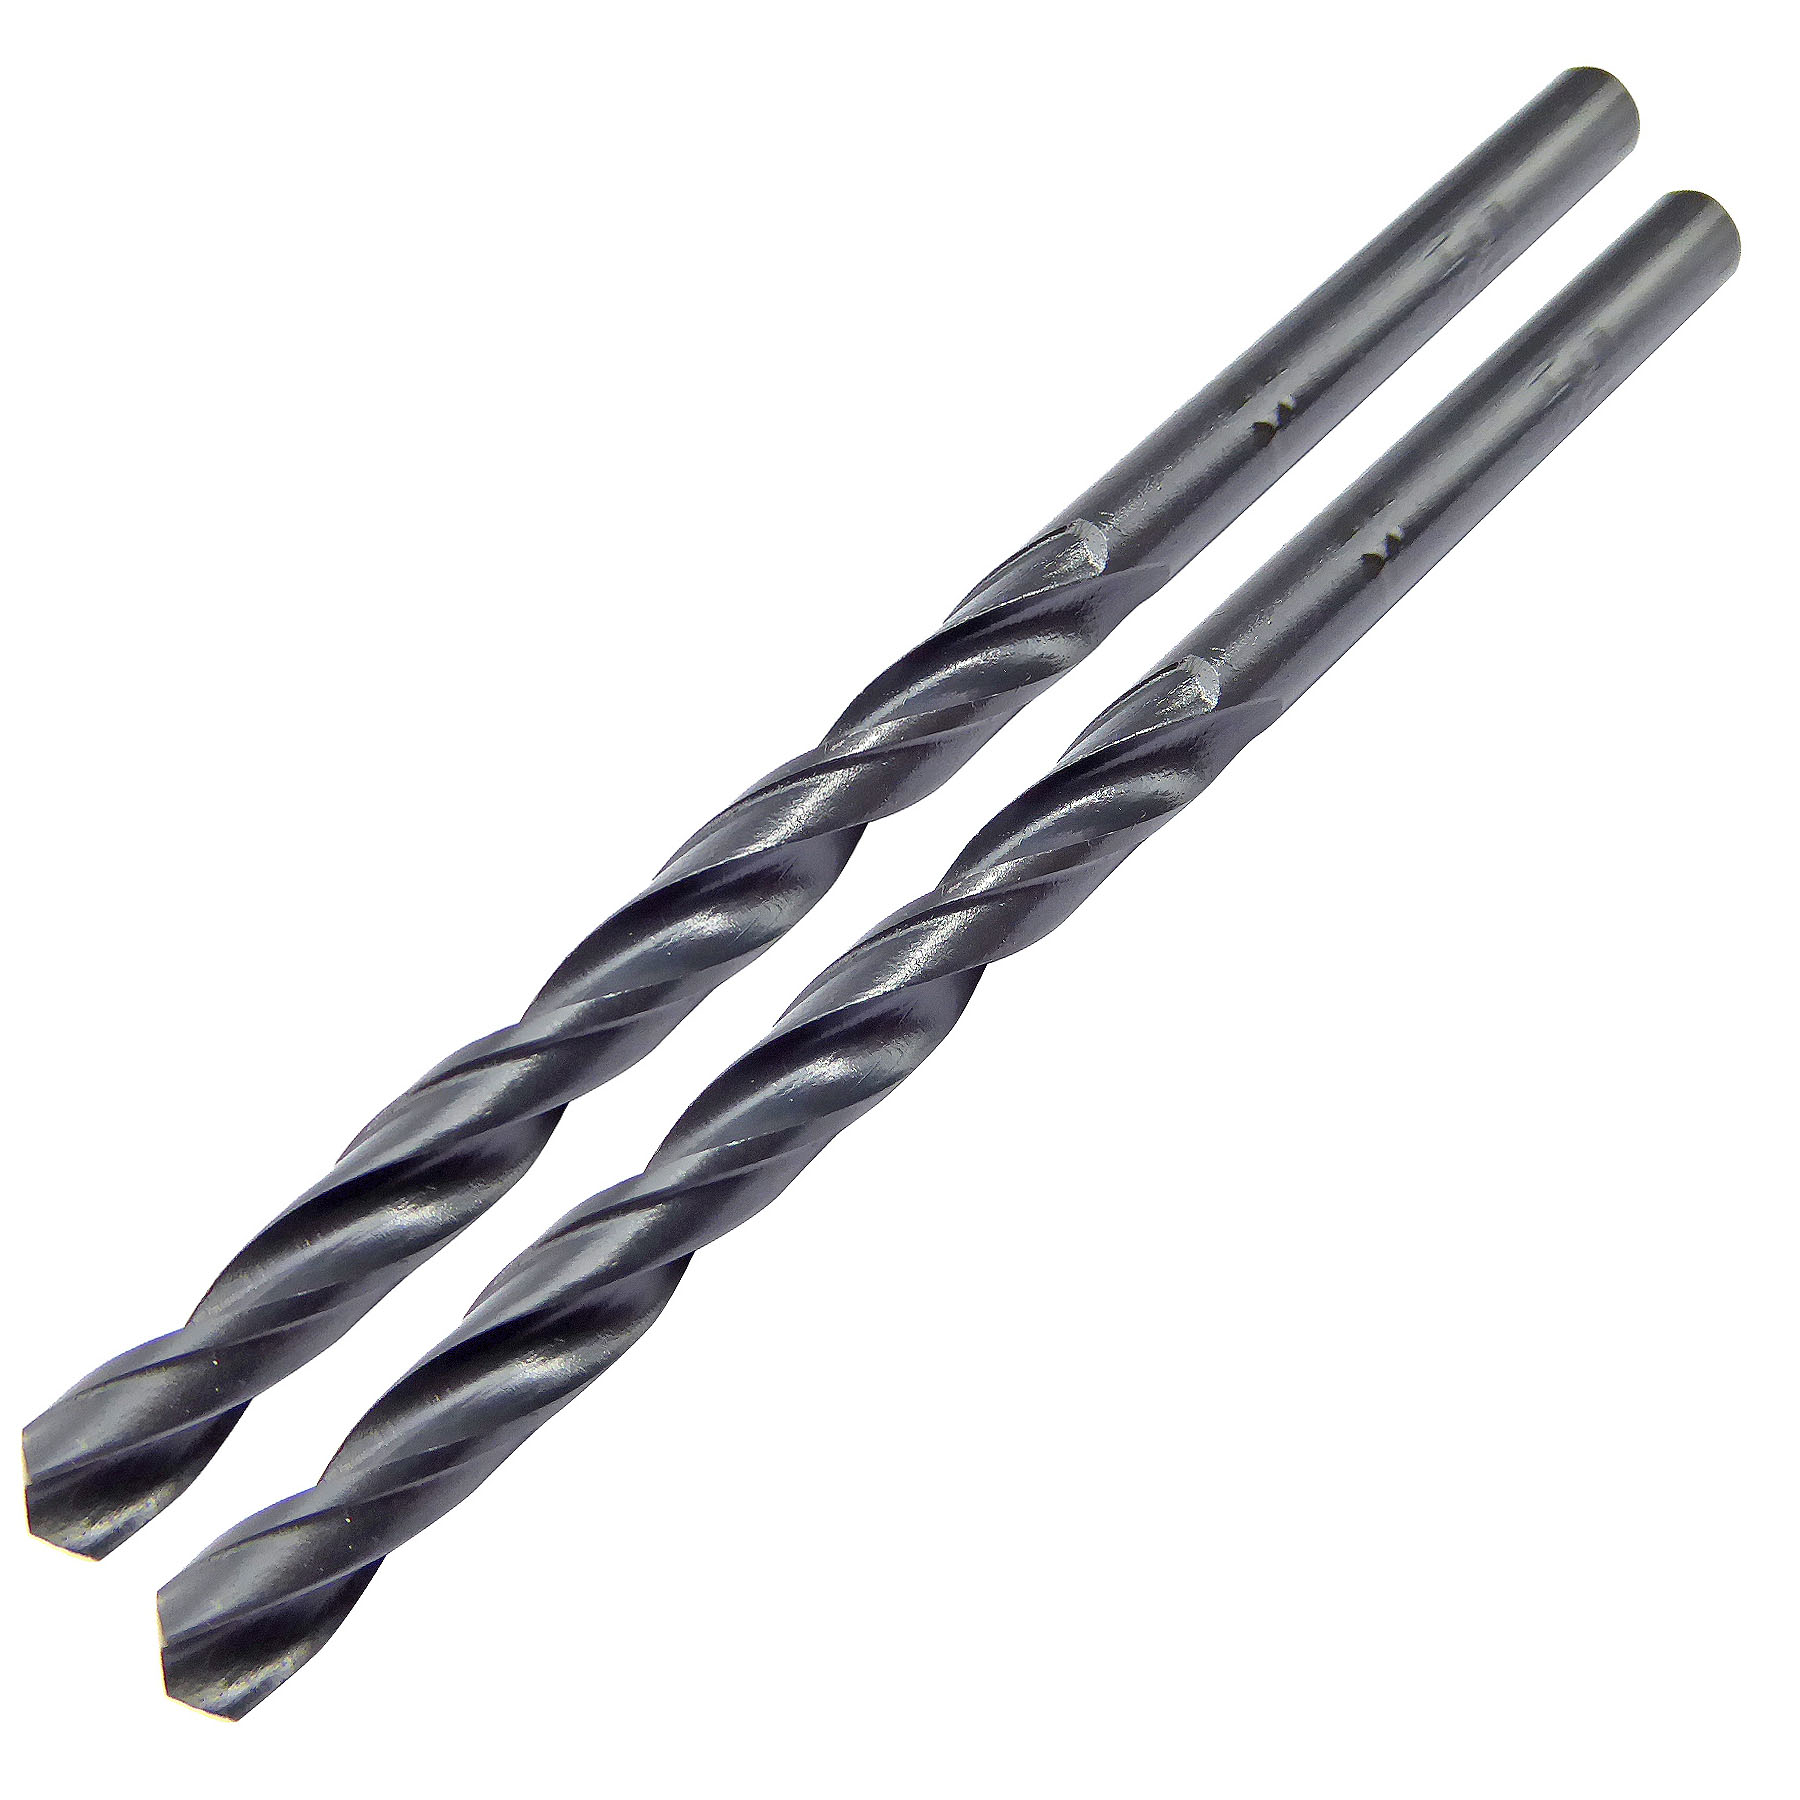 5.5mm x 93mm HSS Roll Forged Jobber Drill Pack of 2